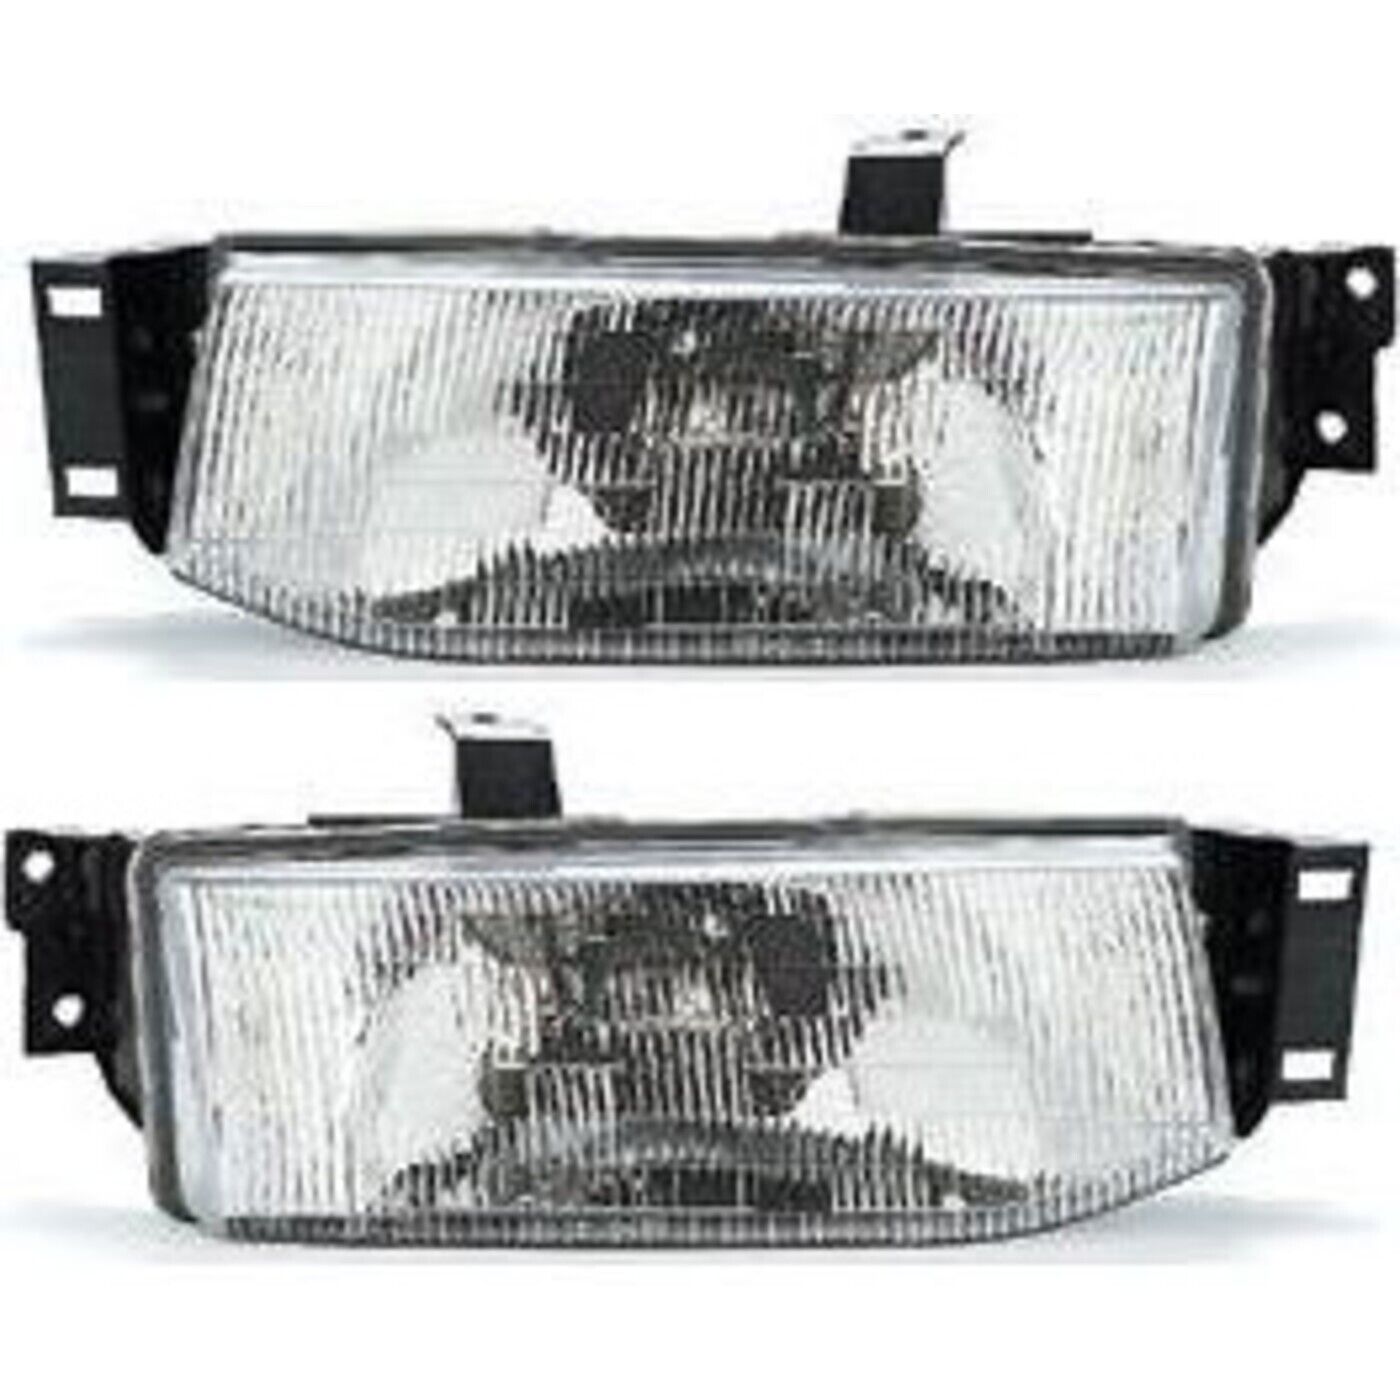 Headlights Headlamps Left & Right Pair Set NEW for 91-96 Ford Escort